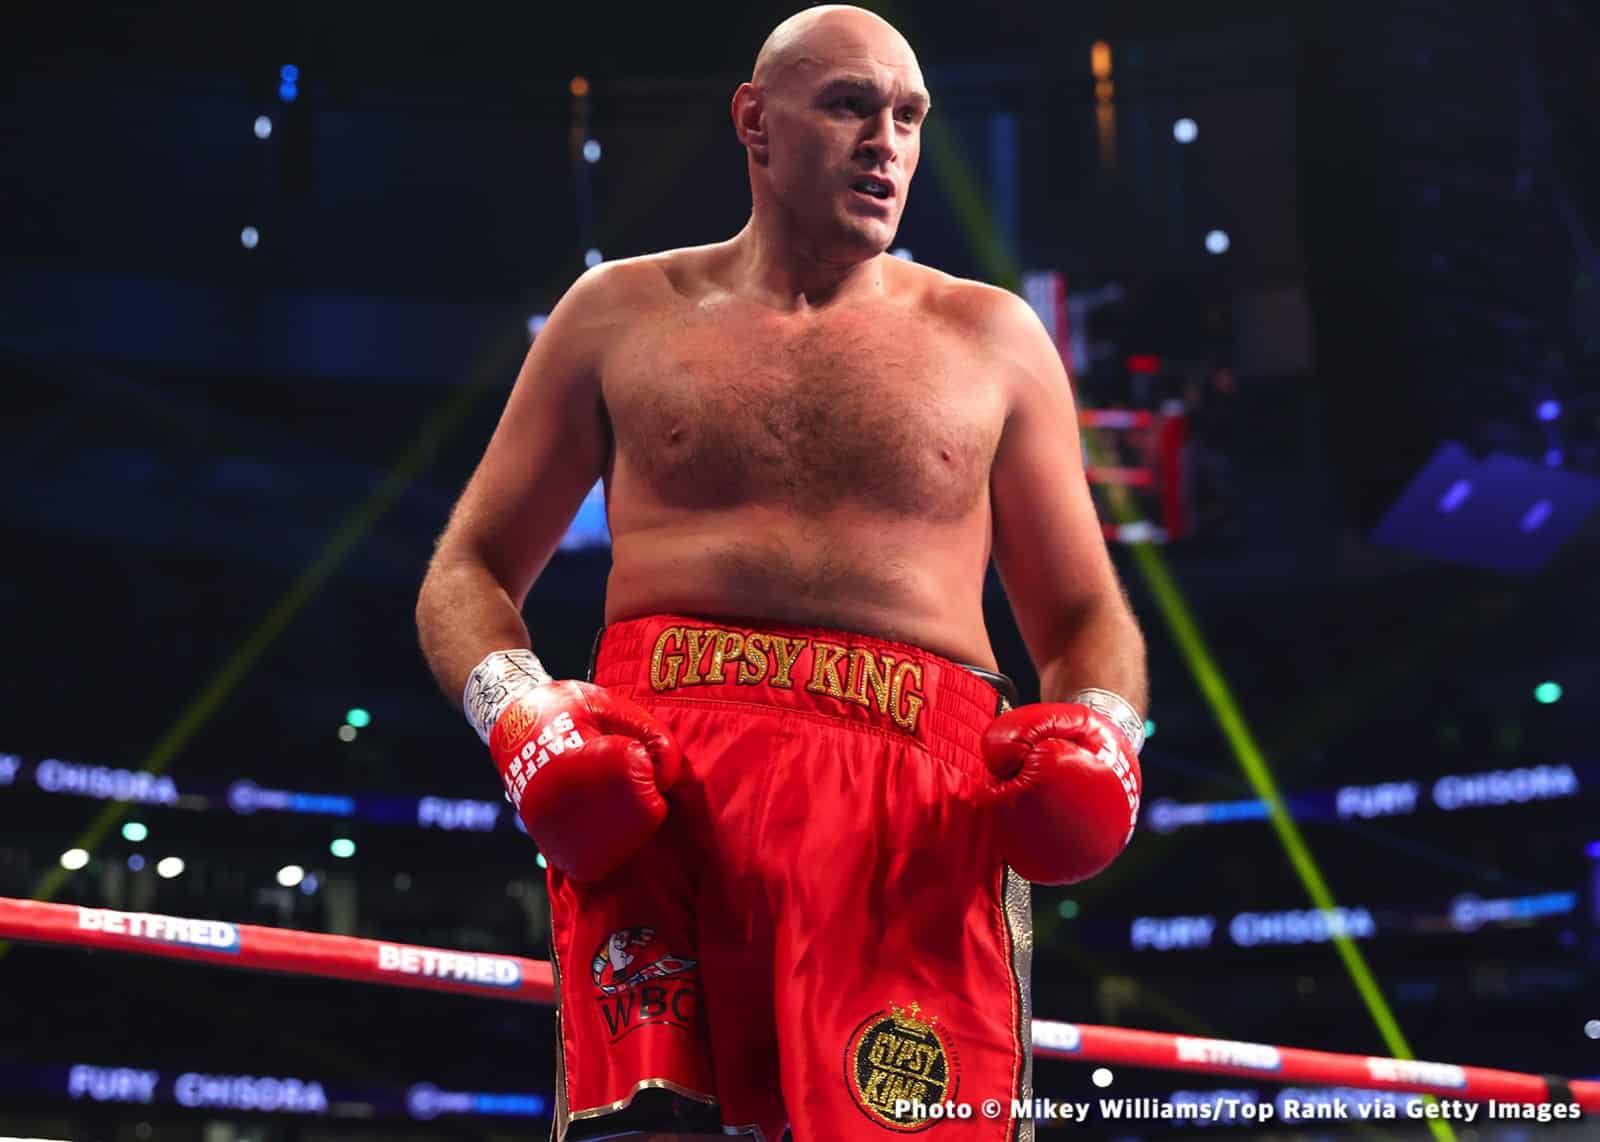 Eddie Hearn On Tyson Fury's “Sent Contract To Joshua” “His Team Have